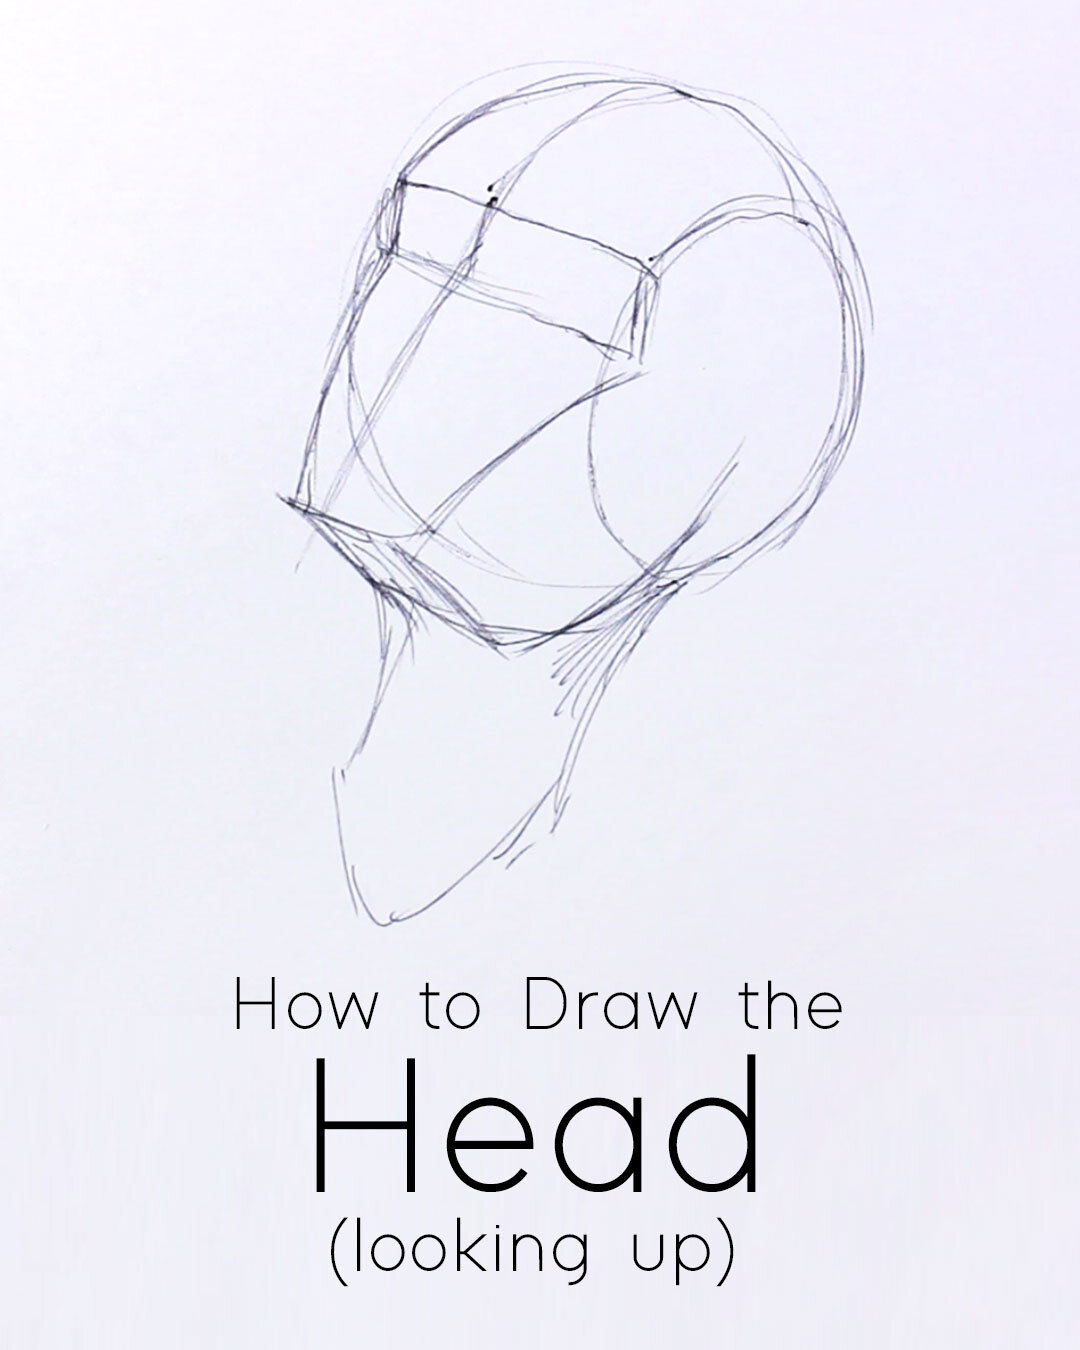 How to Draw the Head Looking Up or as Seen from Below